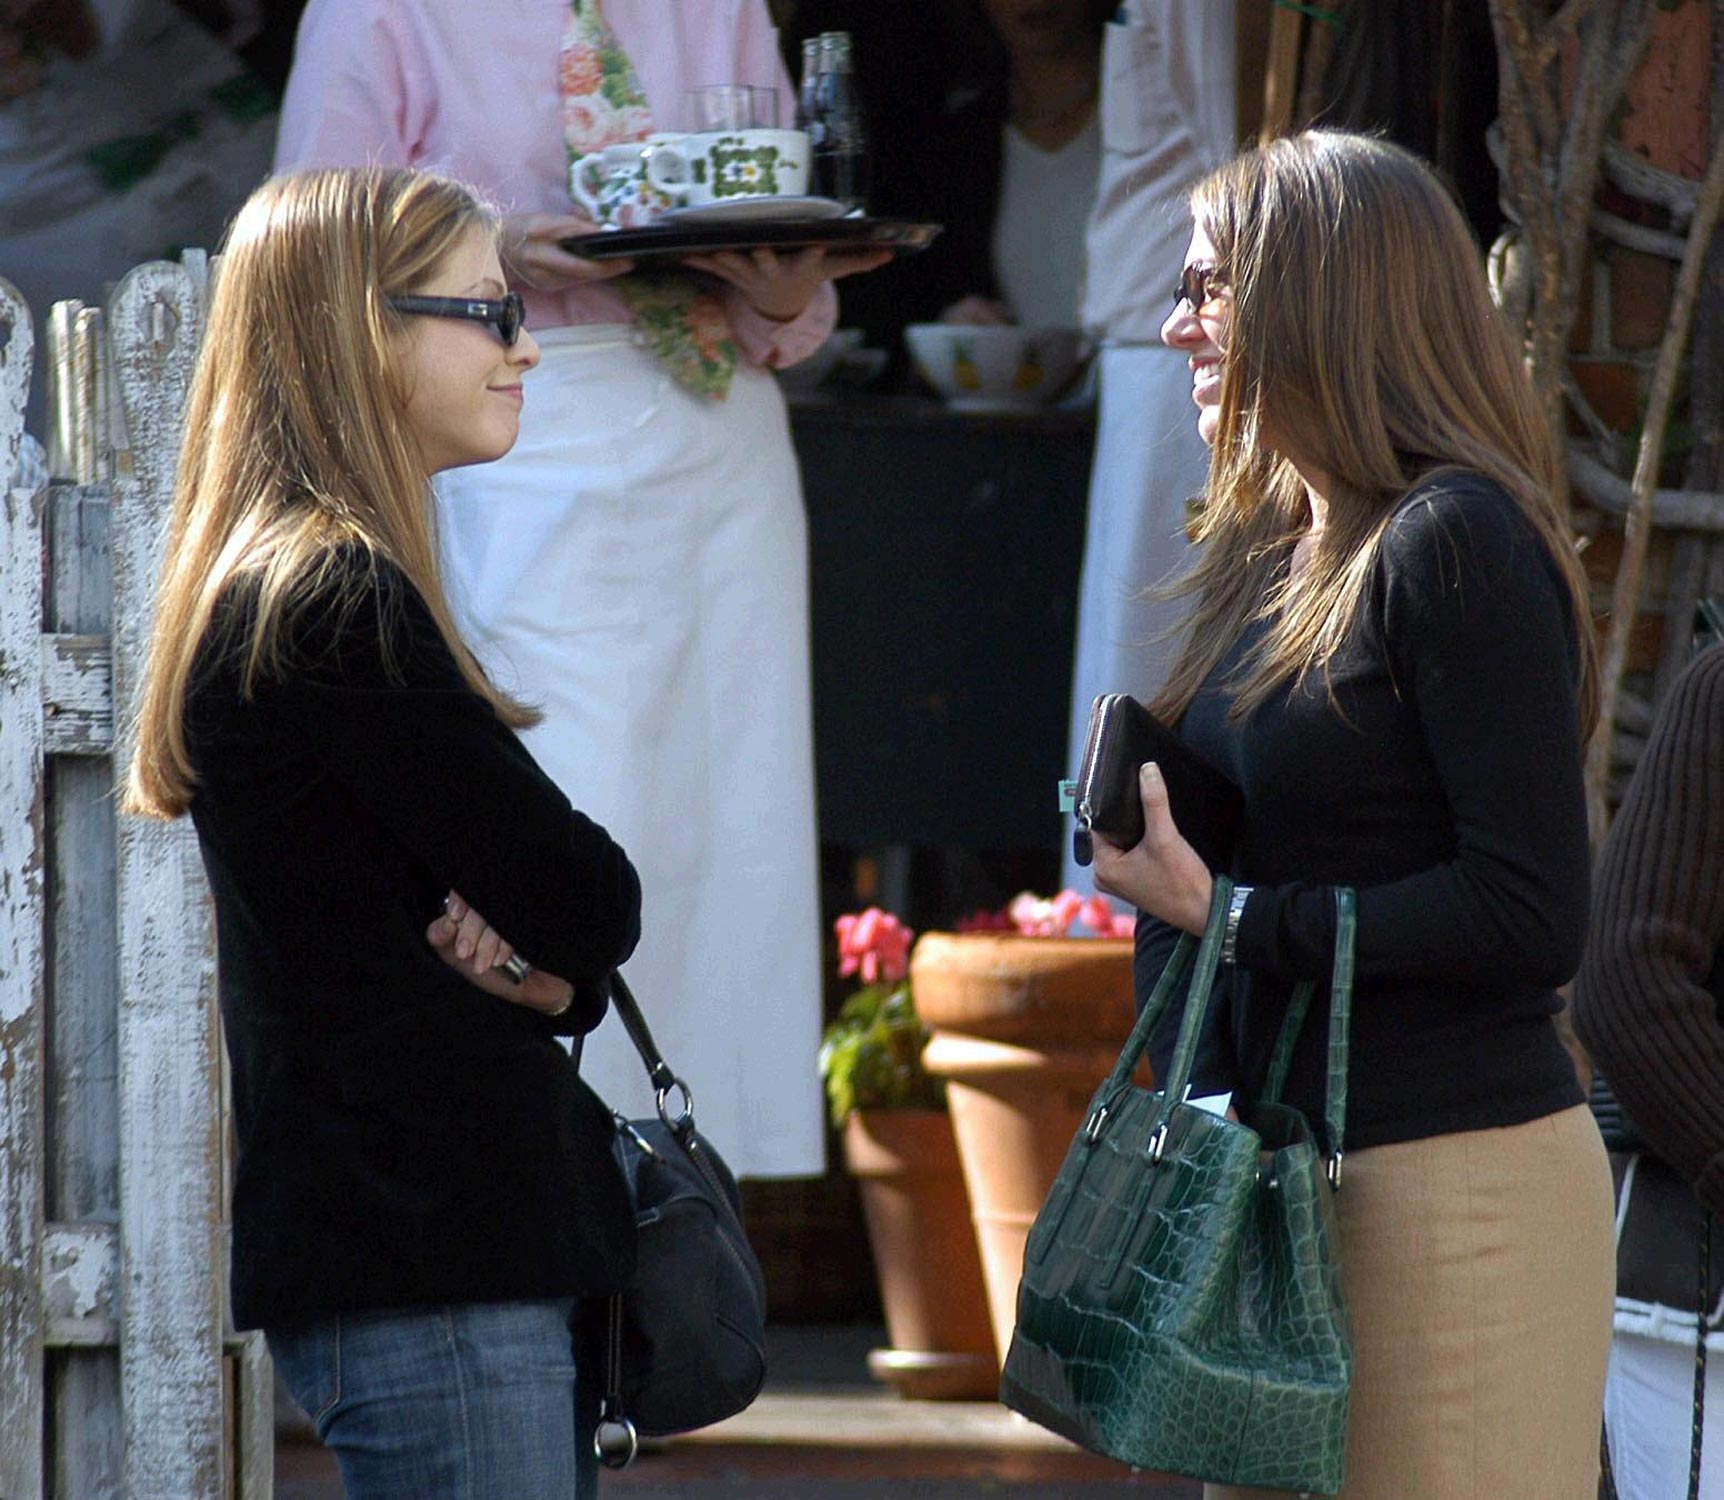 michelle-trachtenberg-and-sister-at-the-ivy-restaurant-hollywood-hq-12-1500.jpg